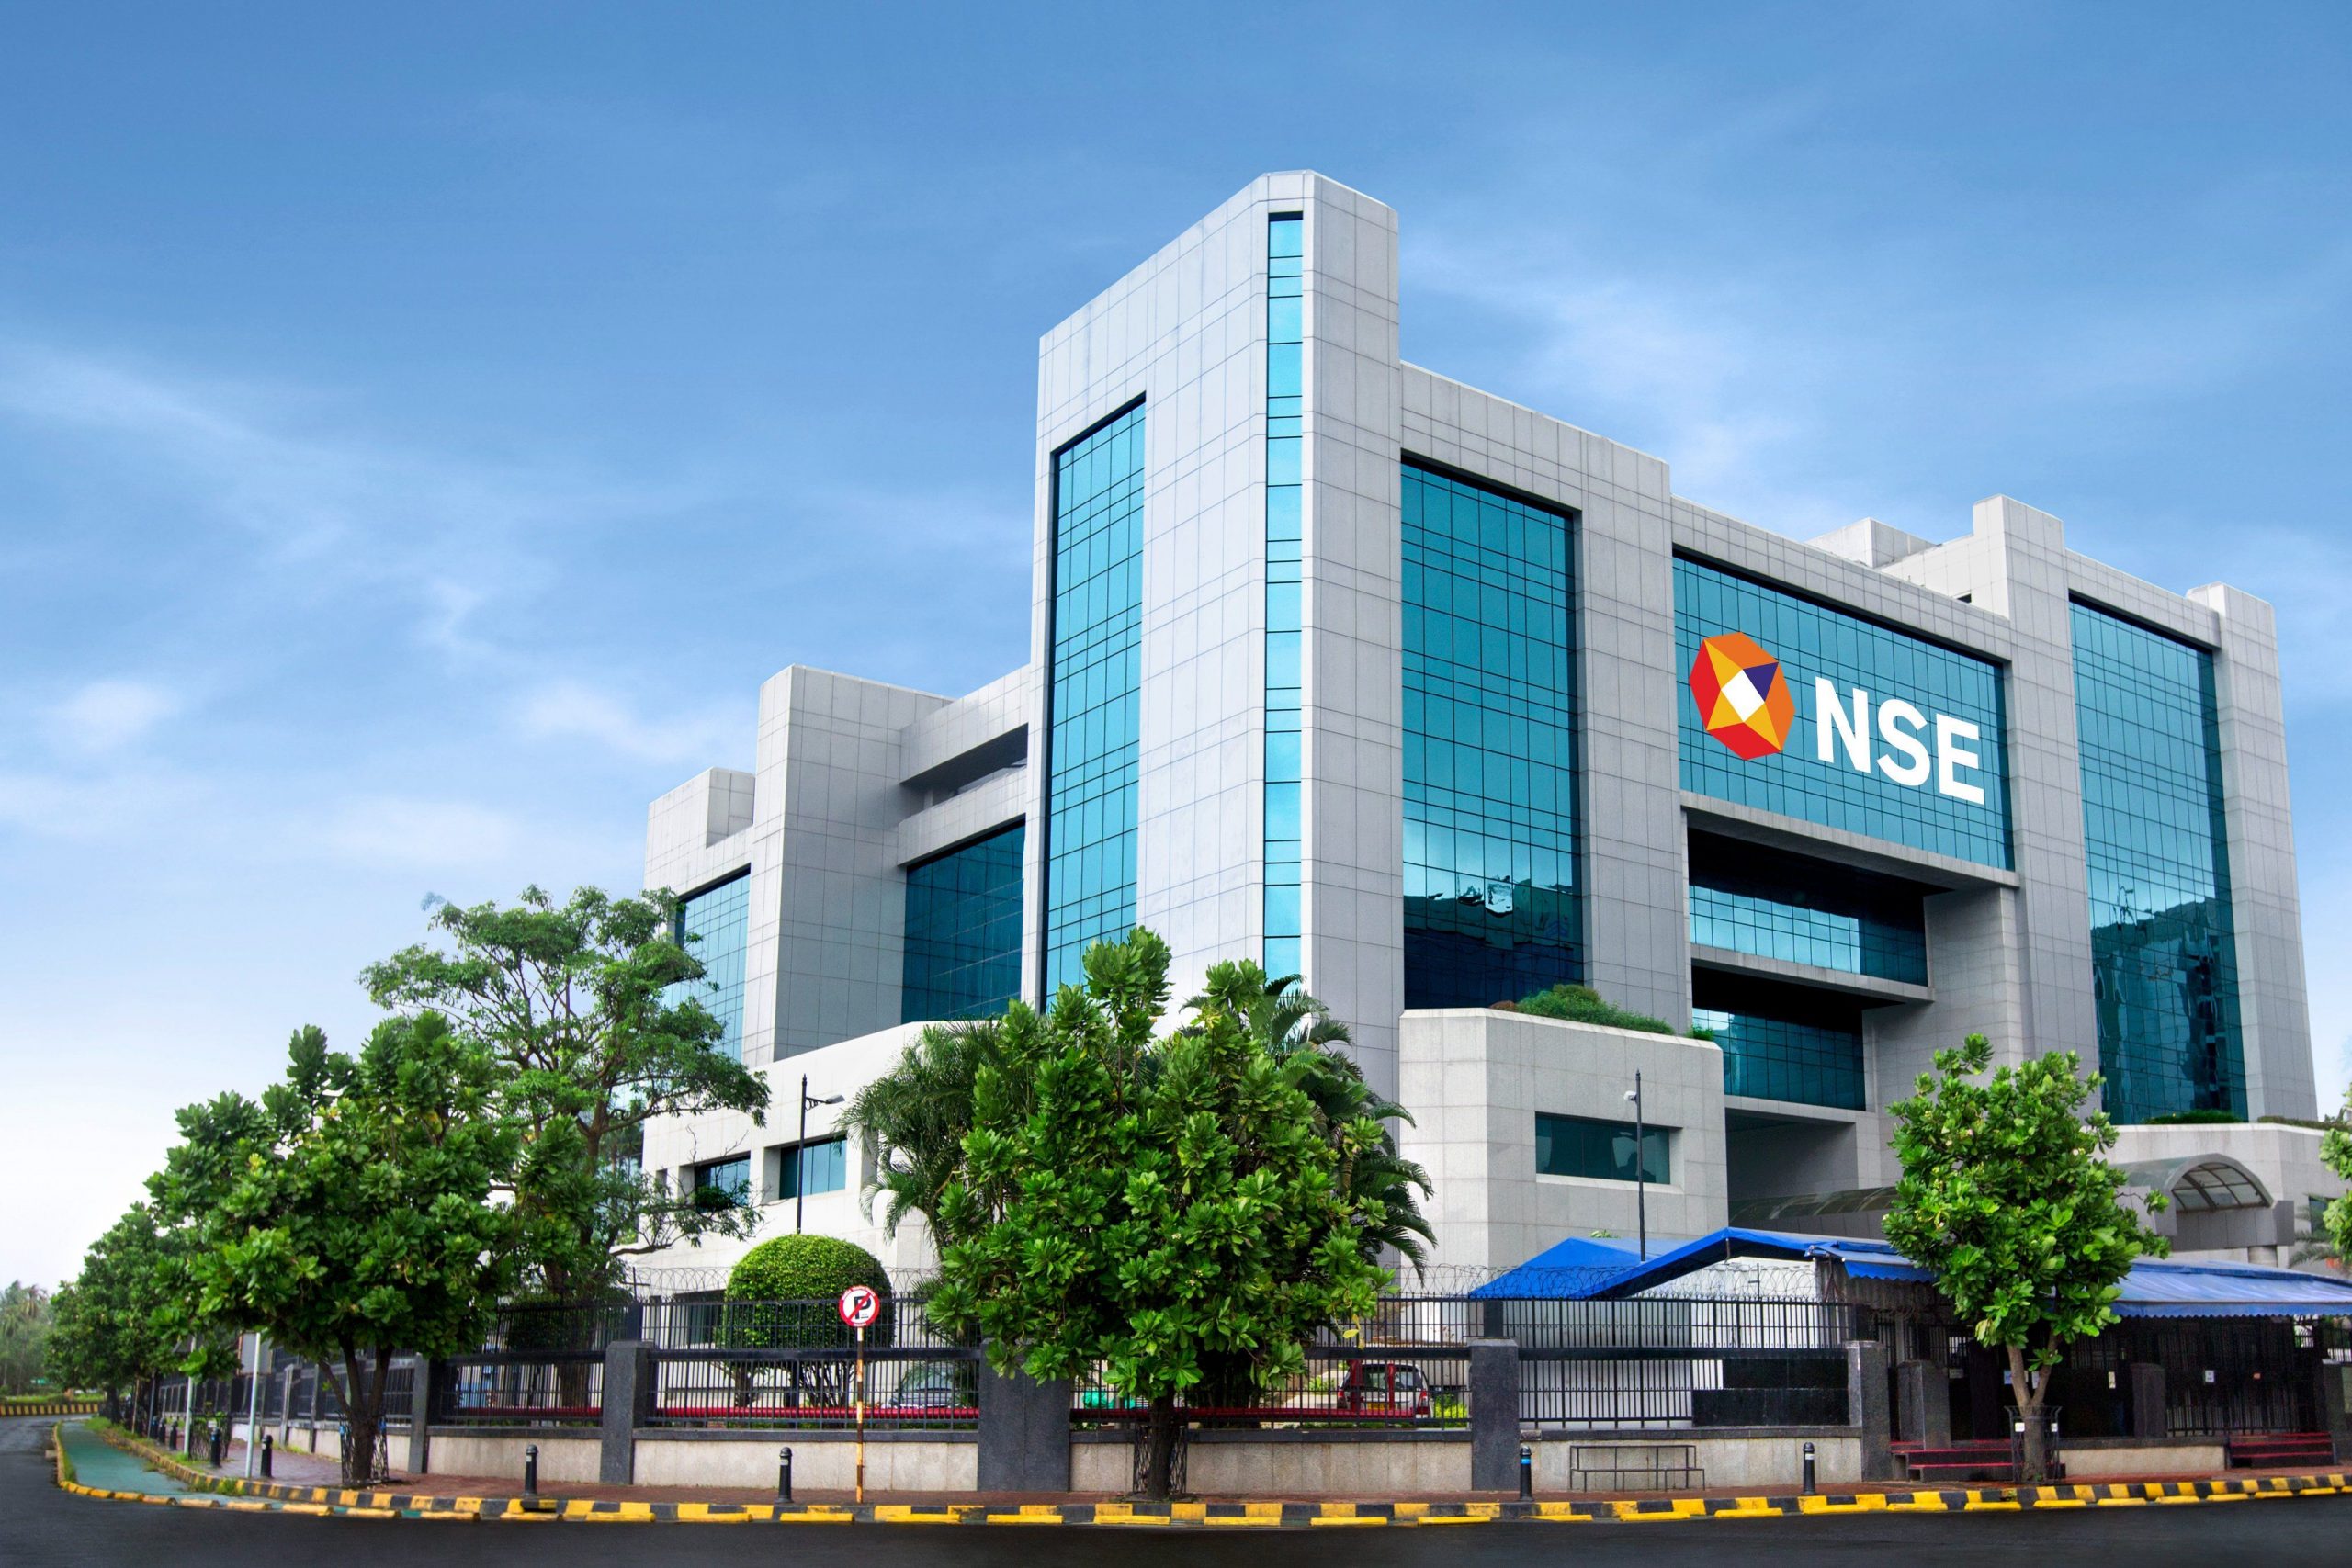 NSE F&O Ban: SAIL, GNFC and others under ban on Thursday, March 24, 2022